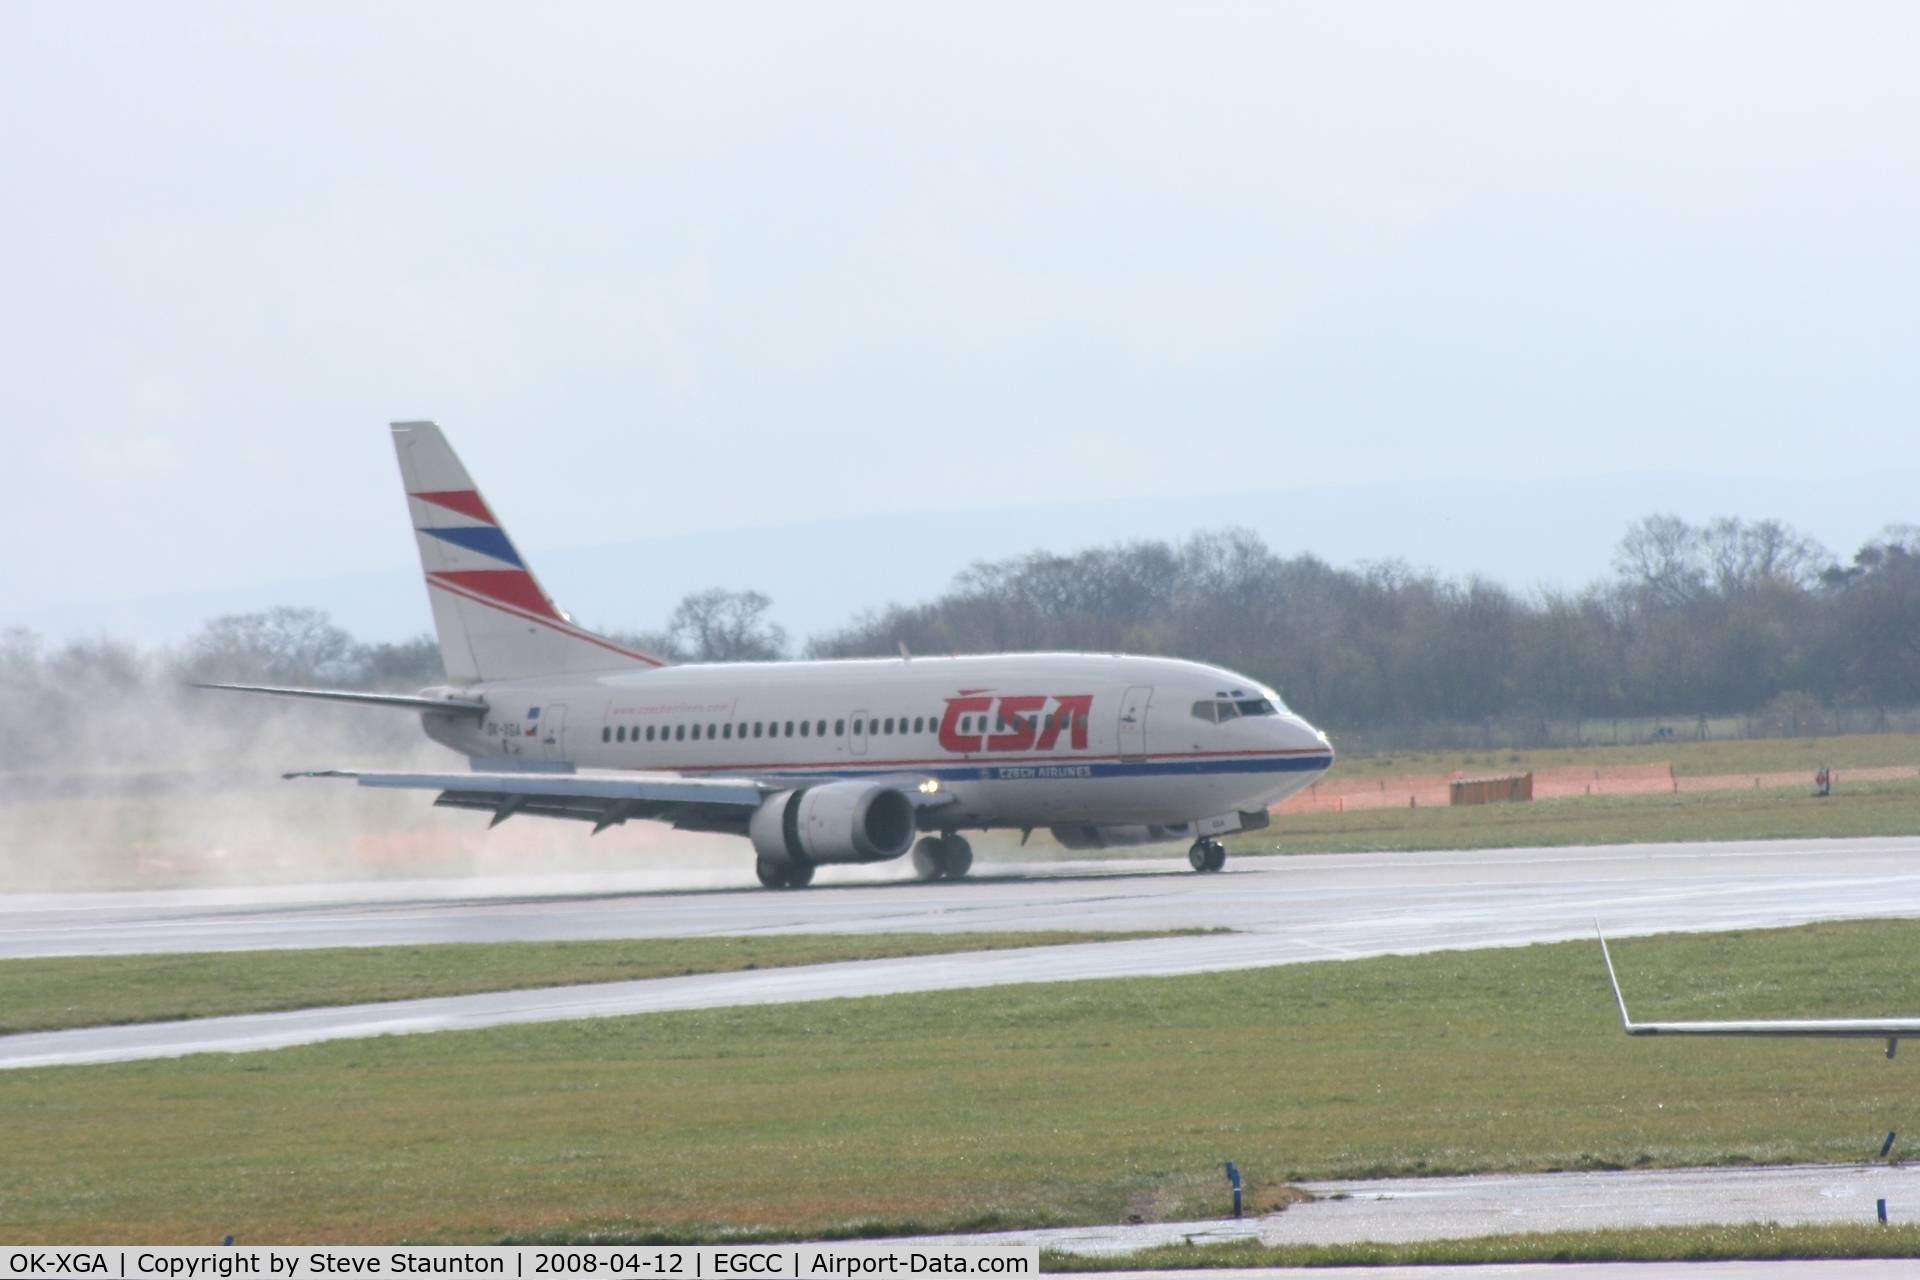 OK-XGA, 1992 Boeing 737-55S C/N 26539, Taken at Manchester Airport on a typical showery April day